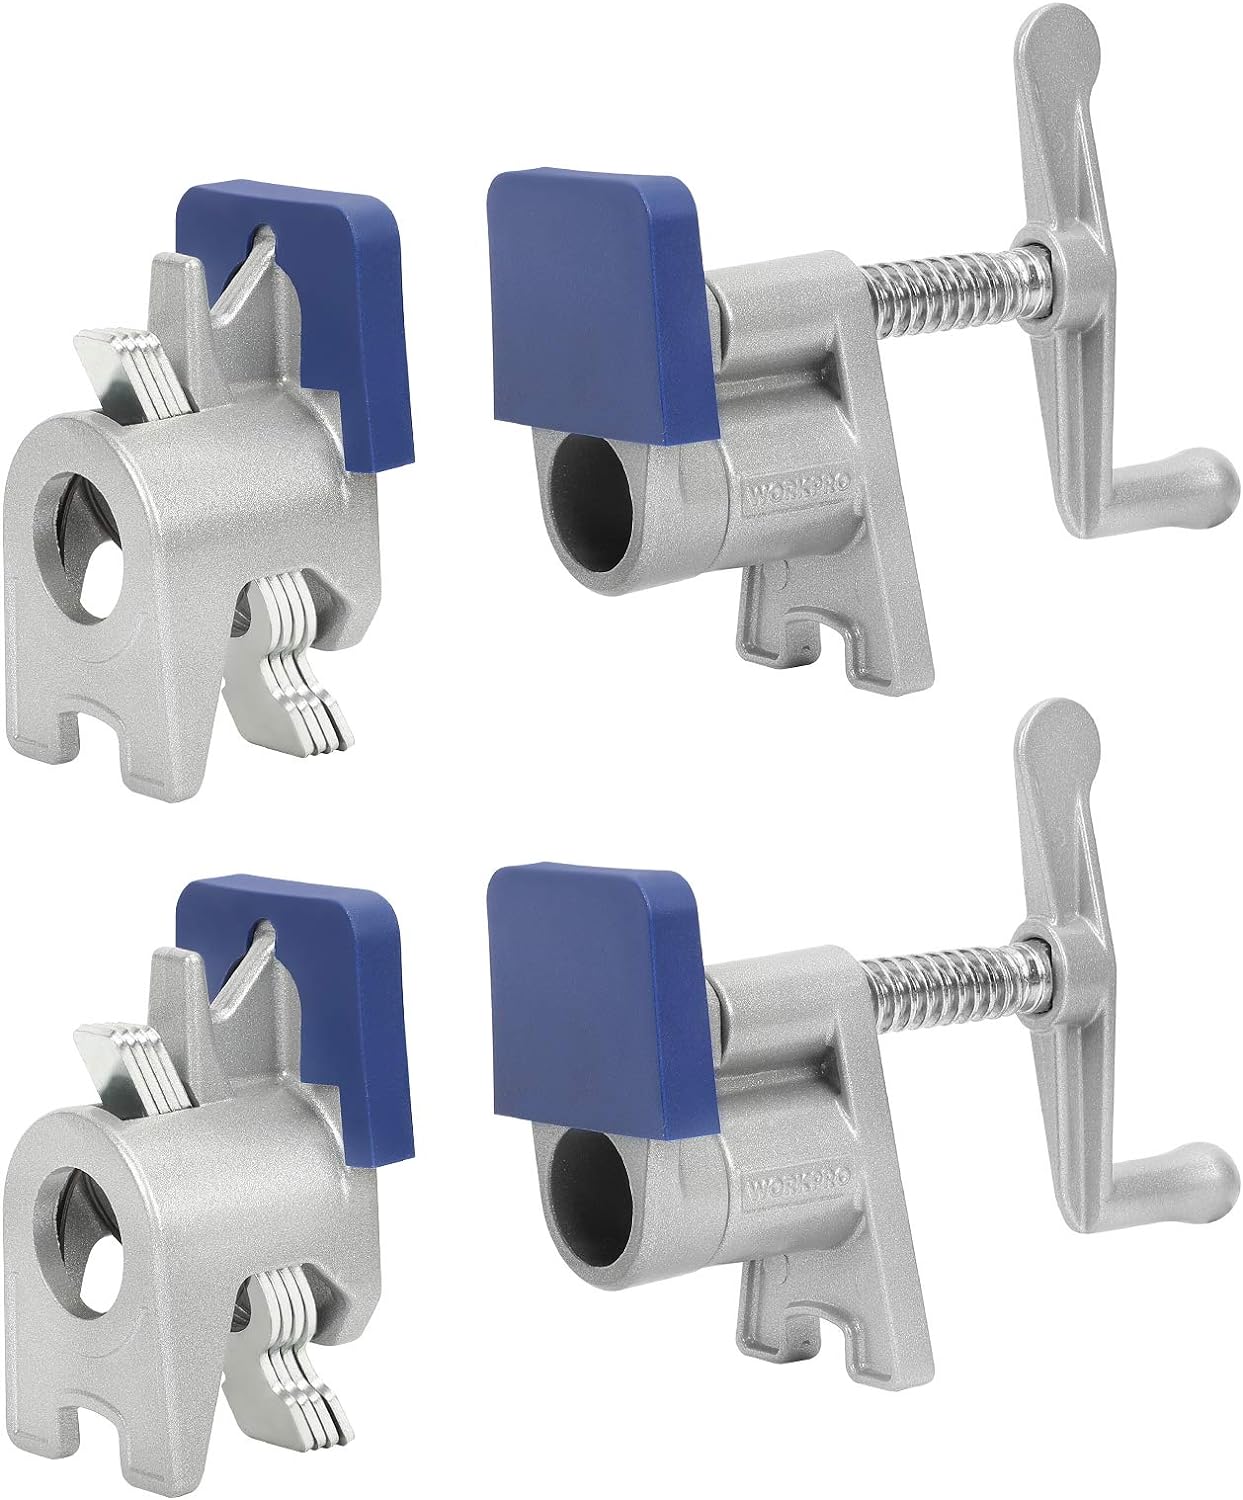 Heavy Duty Quick-grip Steel Woodworking Clamp One-handed Clamp/Spreader with 3/4 Throat Depth 4 Pack Pipe Clamp Set